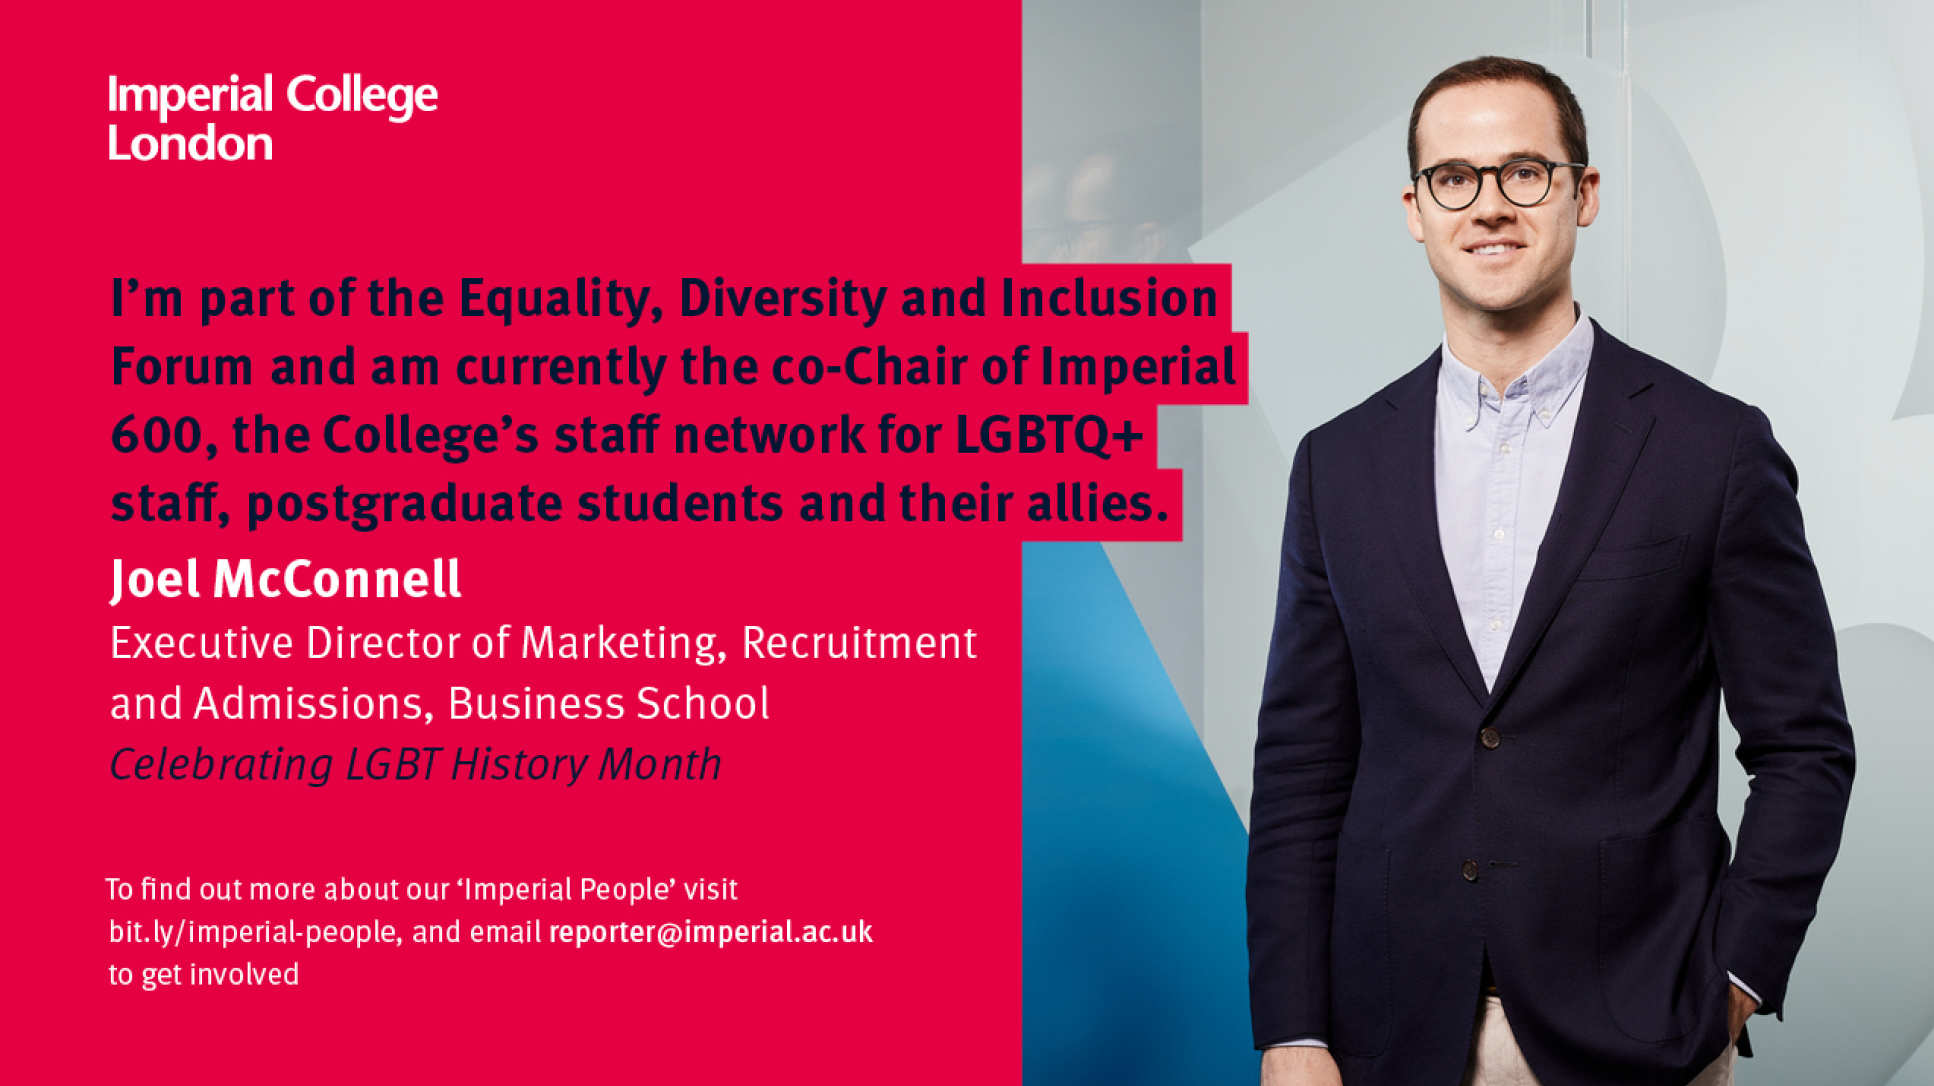 man in suit smiles at camera - quote on the left details that he is part of the Equality, Diversity and Inclusion Forum and is co-Chair of Imperial 600